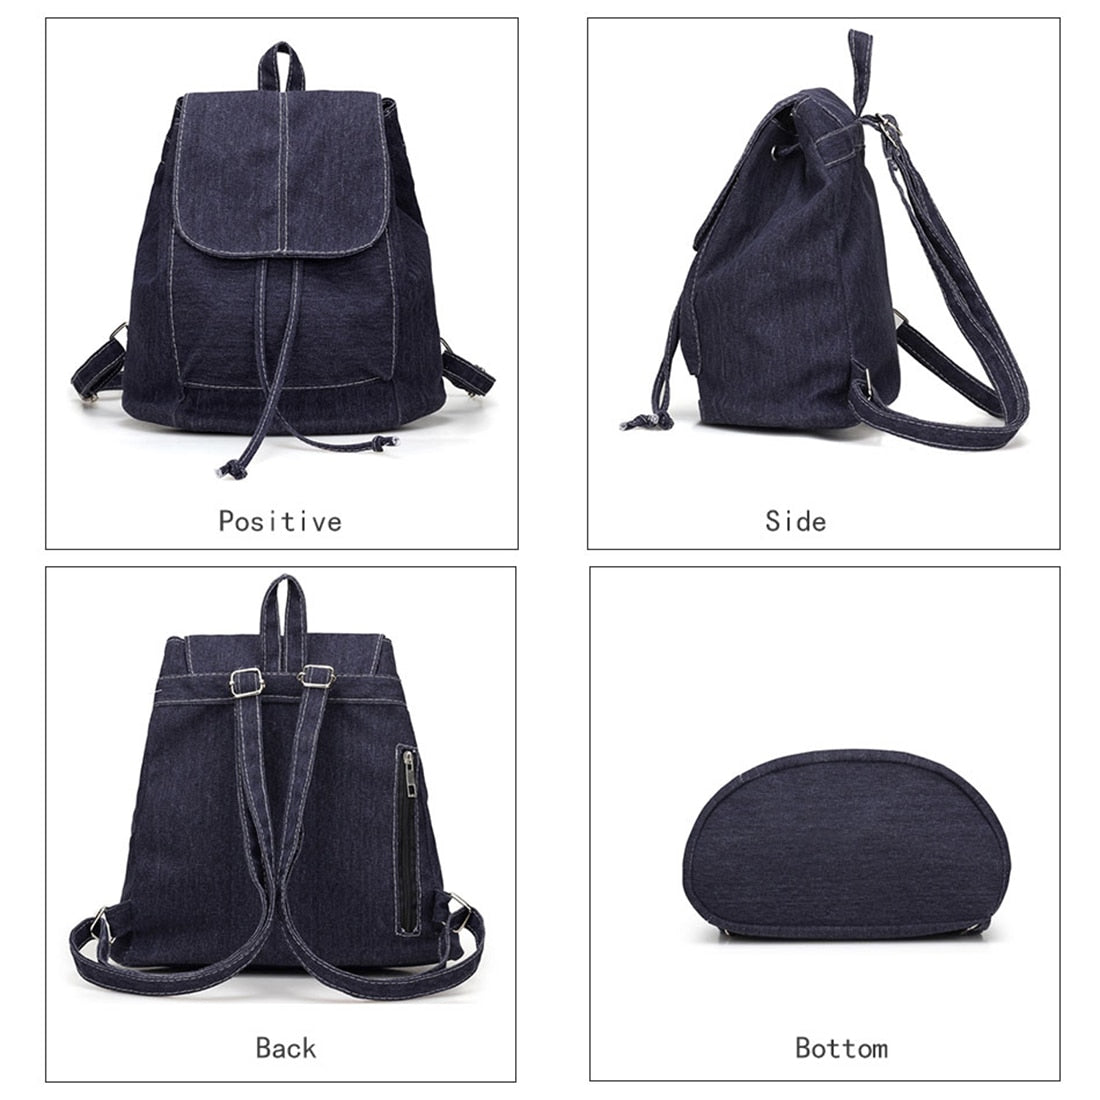 New Canvas Women Backpack Drawstring School Bags For Teenagers Girls Small Backpack Female Rucksack - ebowsos